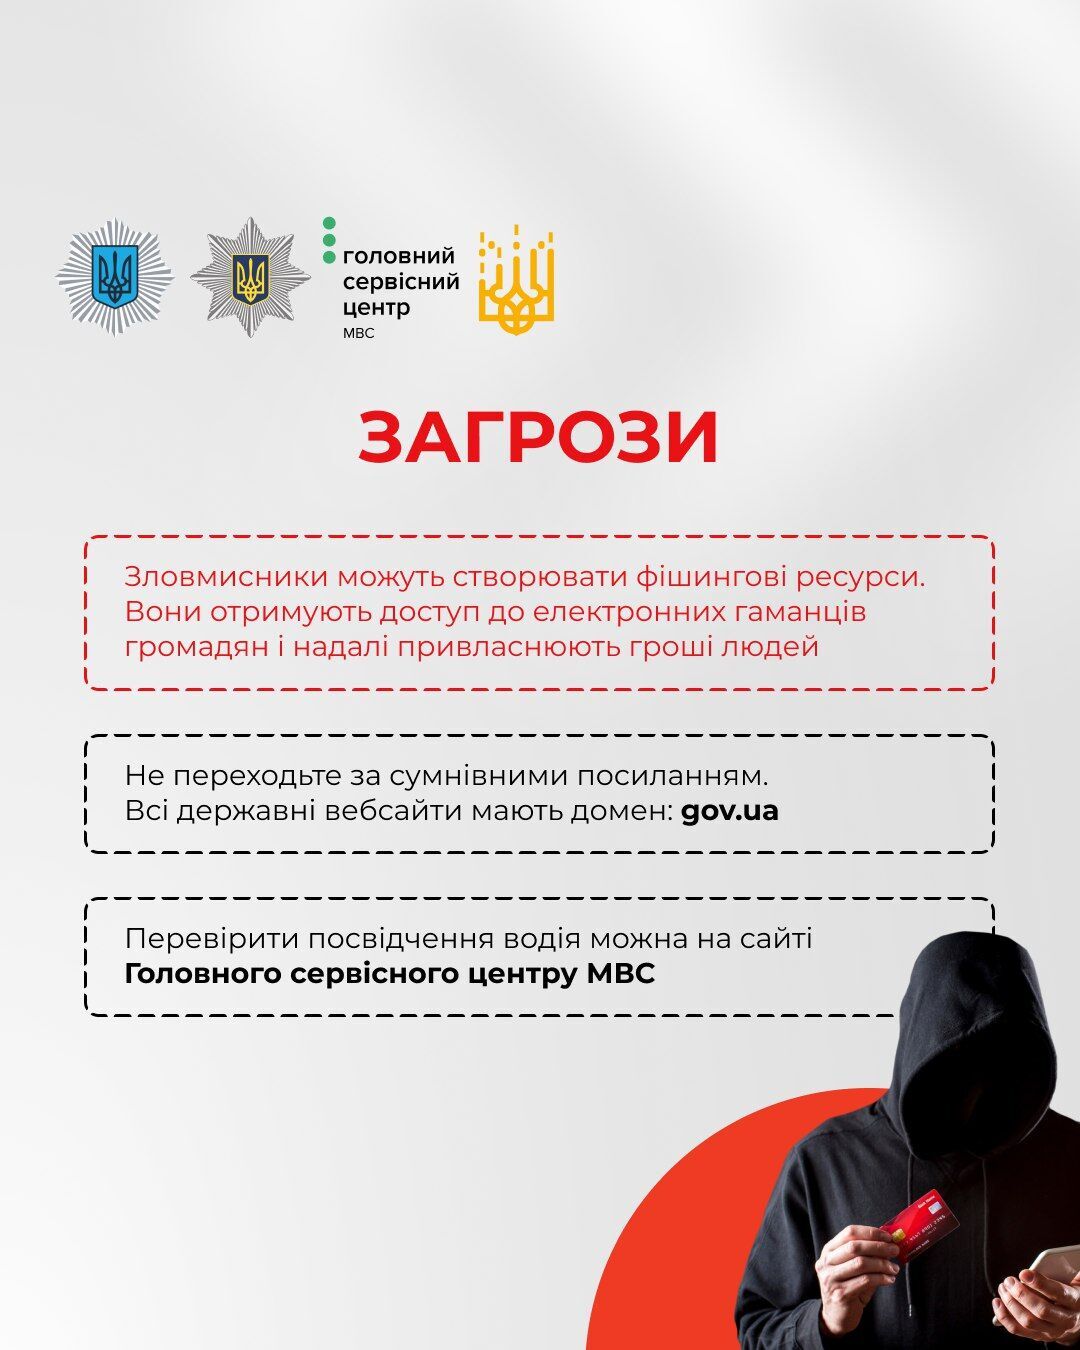 Ukrainians warned against buying fake driver's licenses: what are the risks